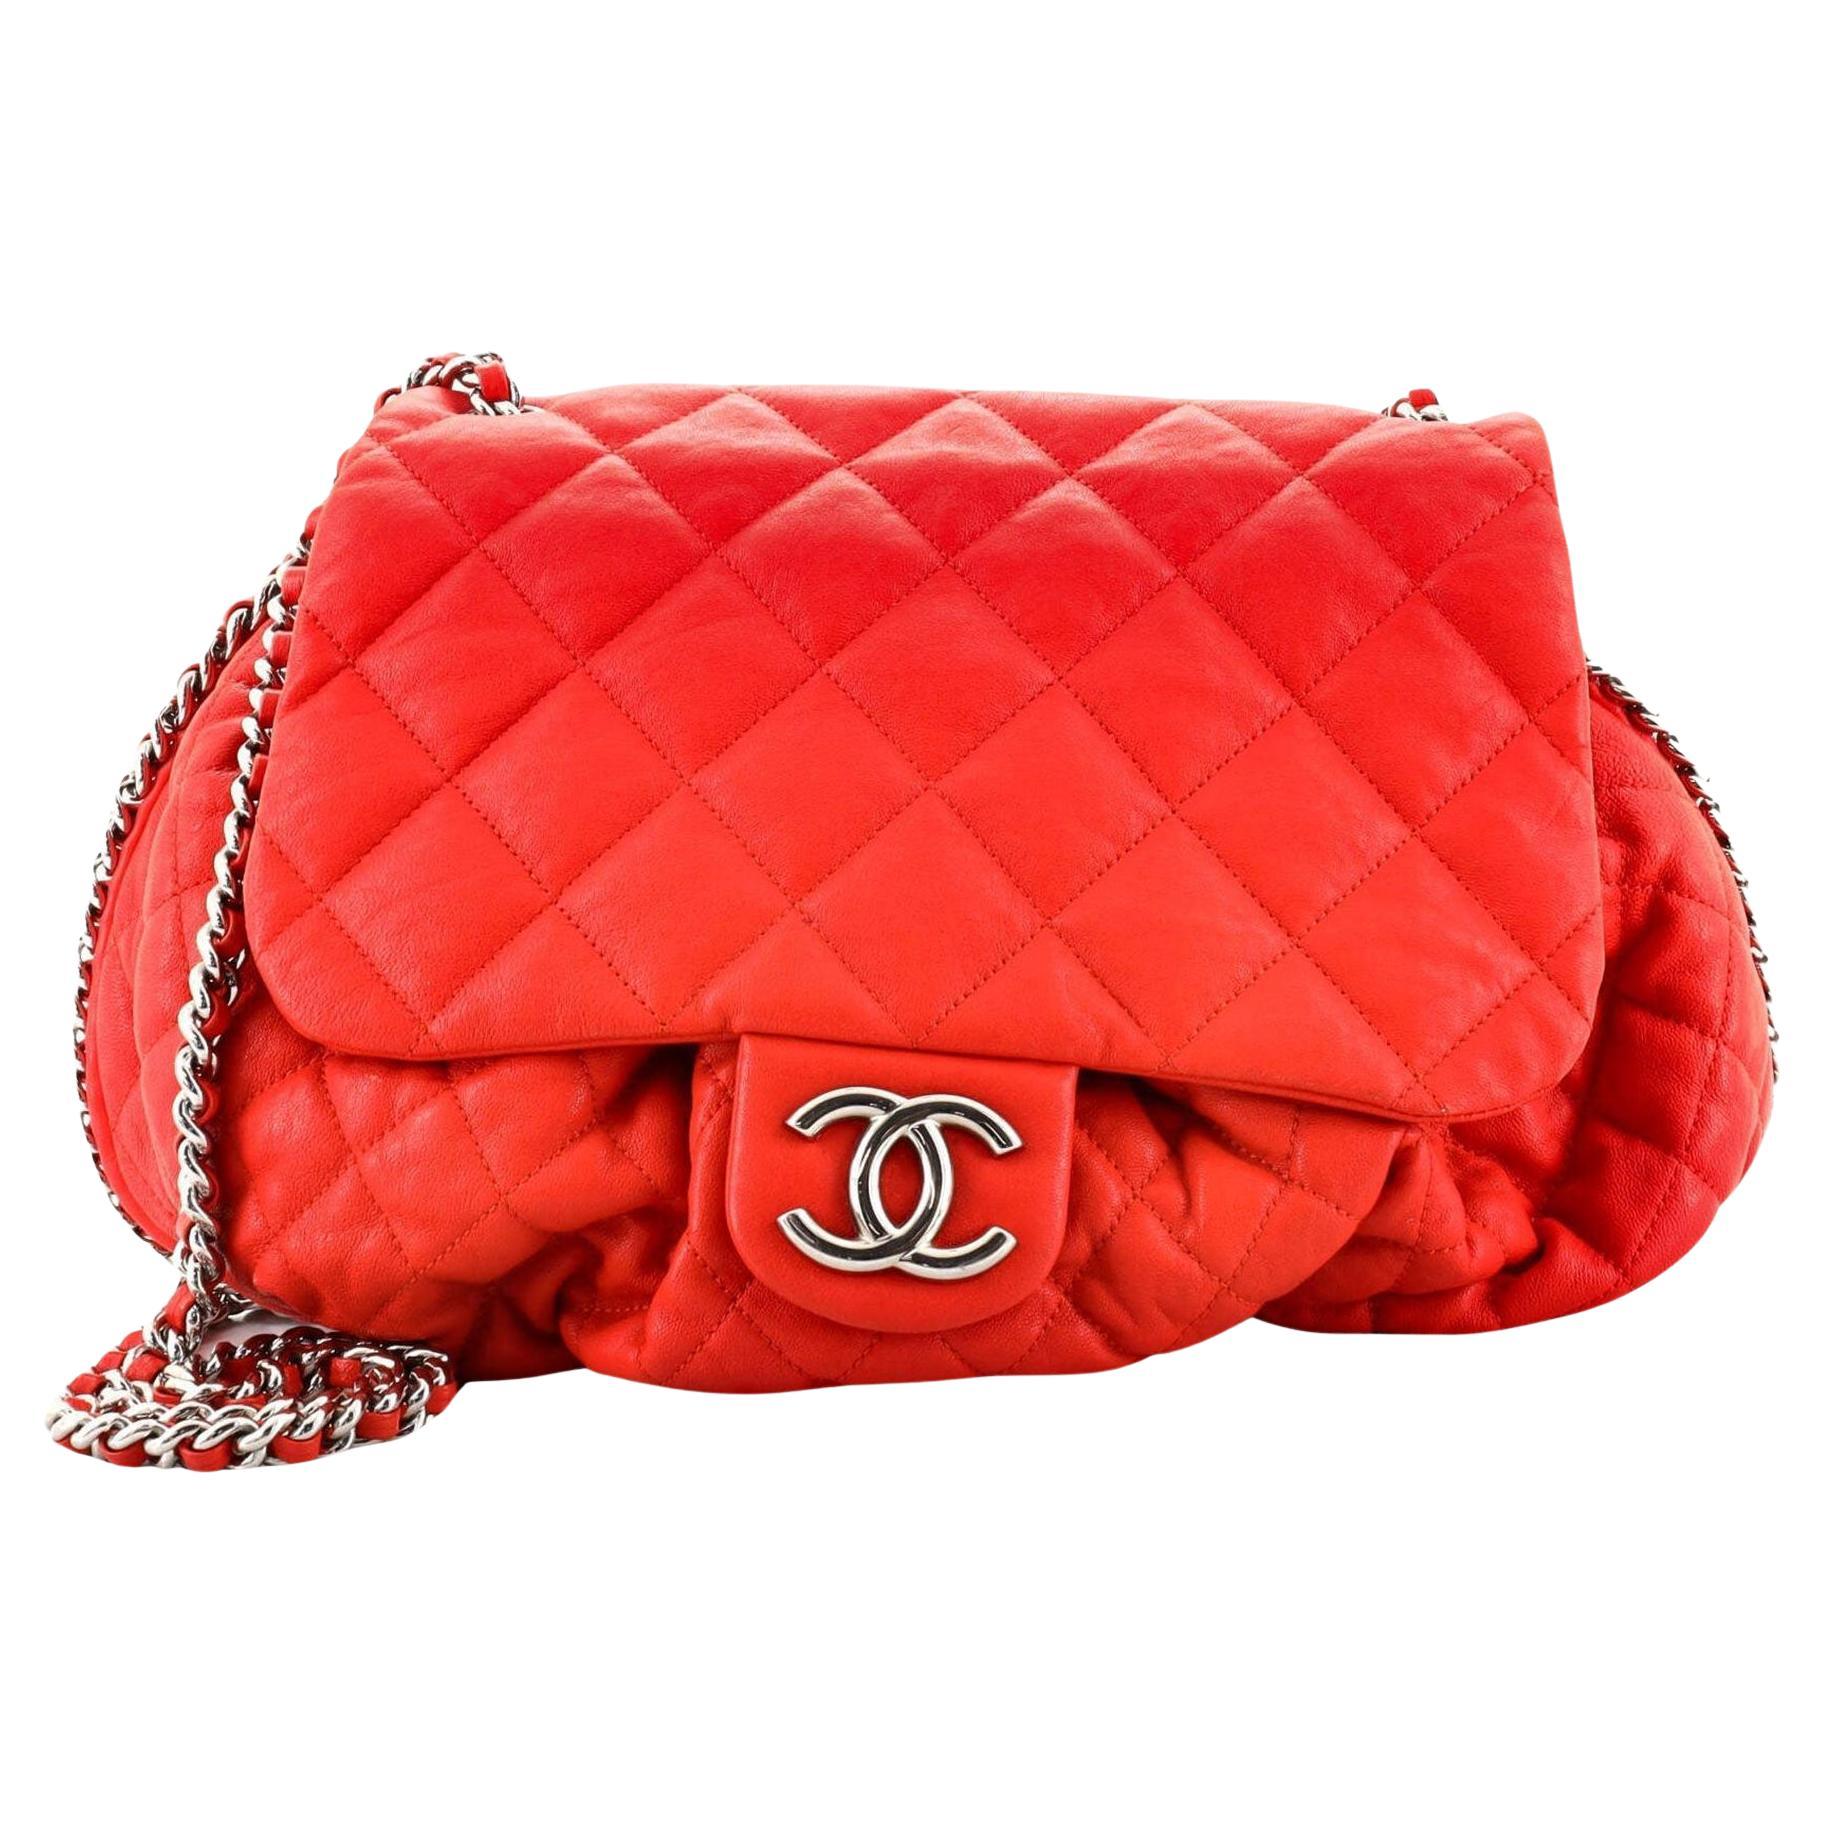 Chanel Large Chain Around Limited Edition Pristine Red Calfskin Leather Flap Bag For Sale